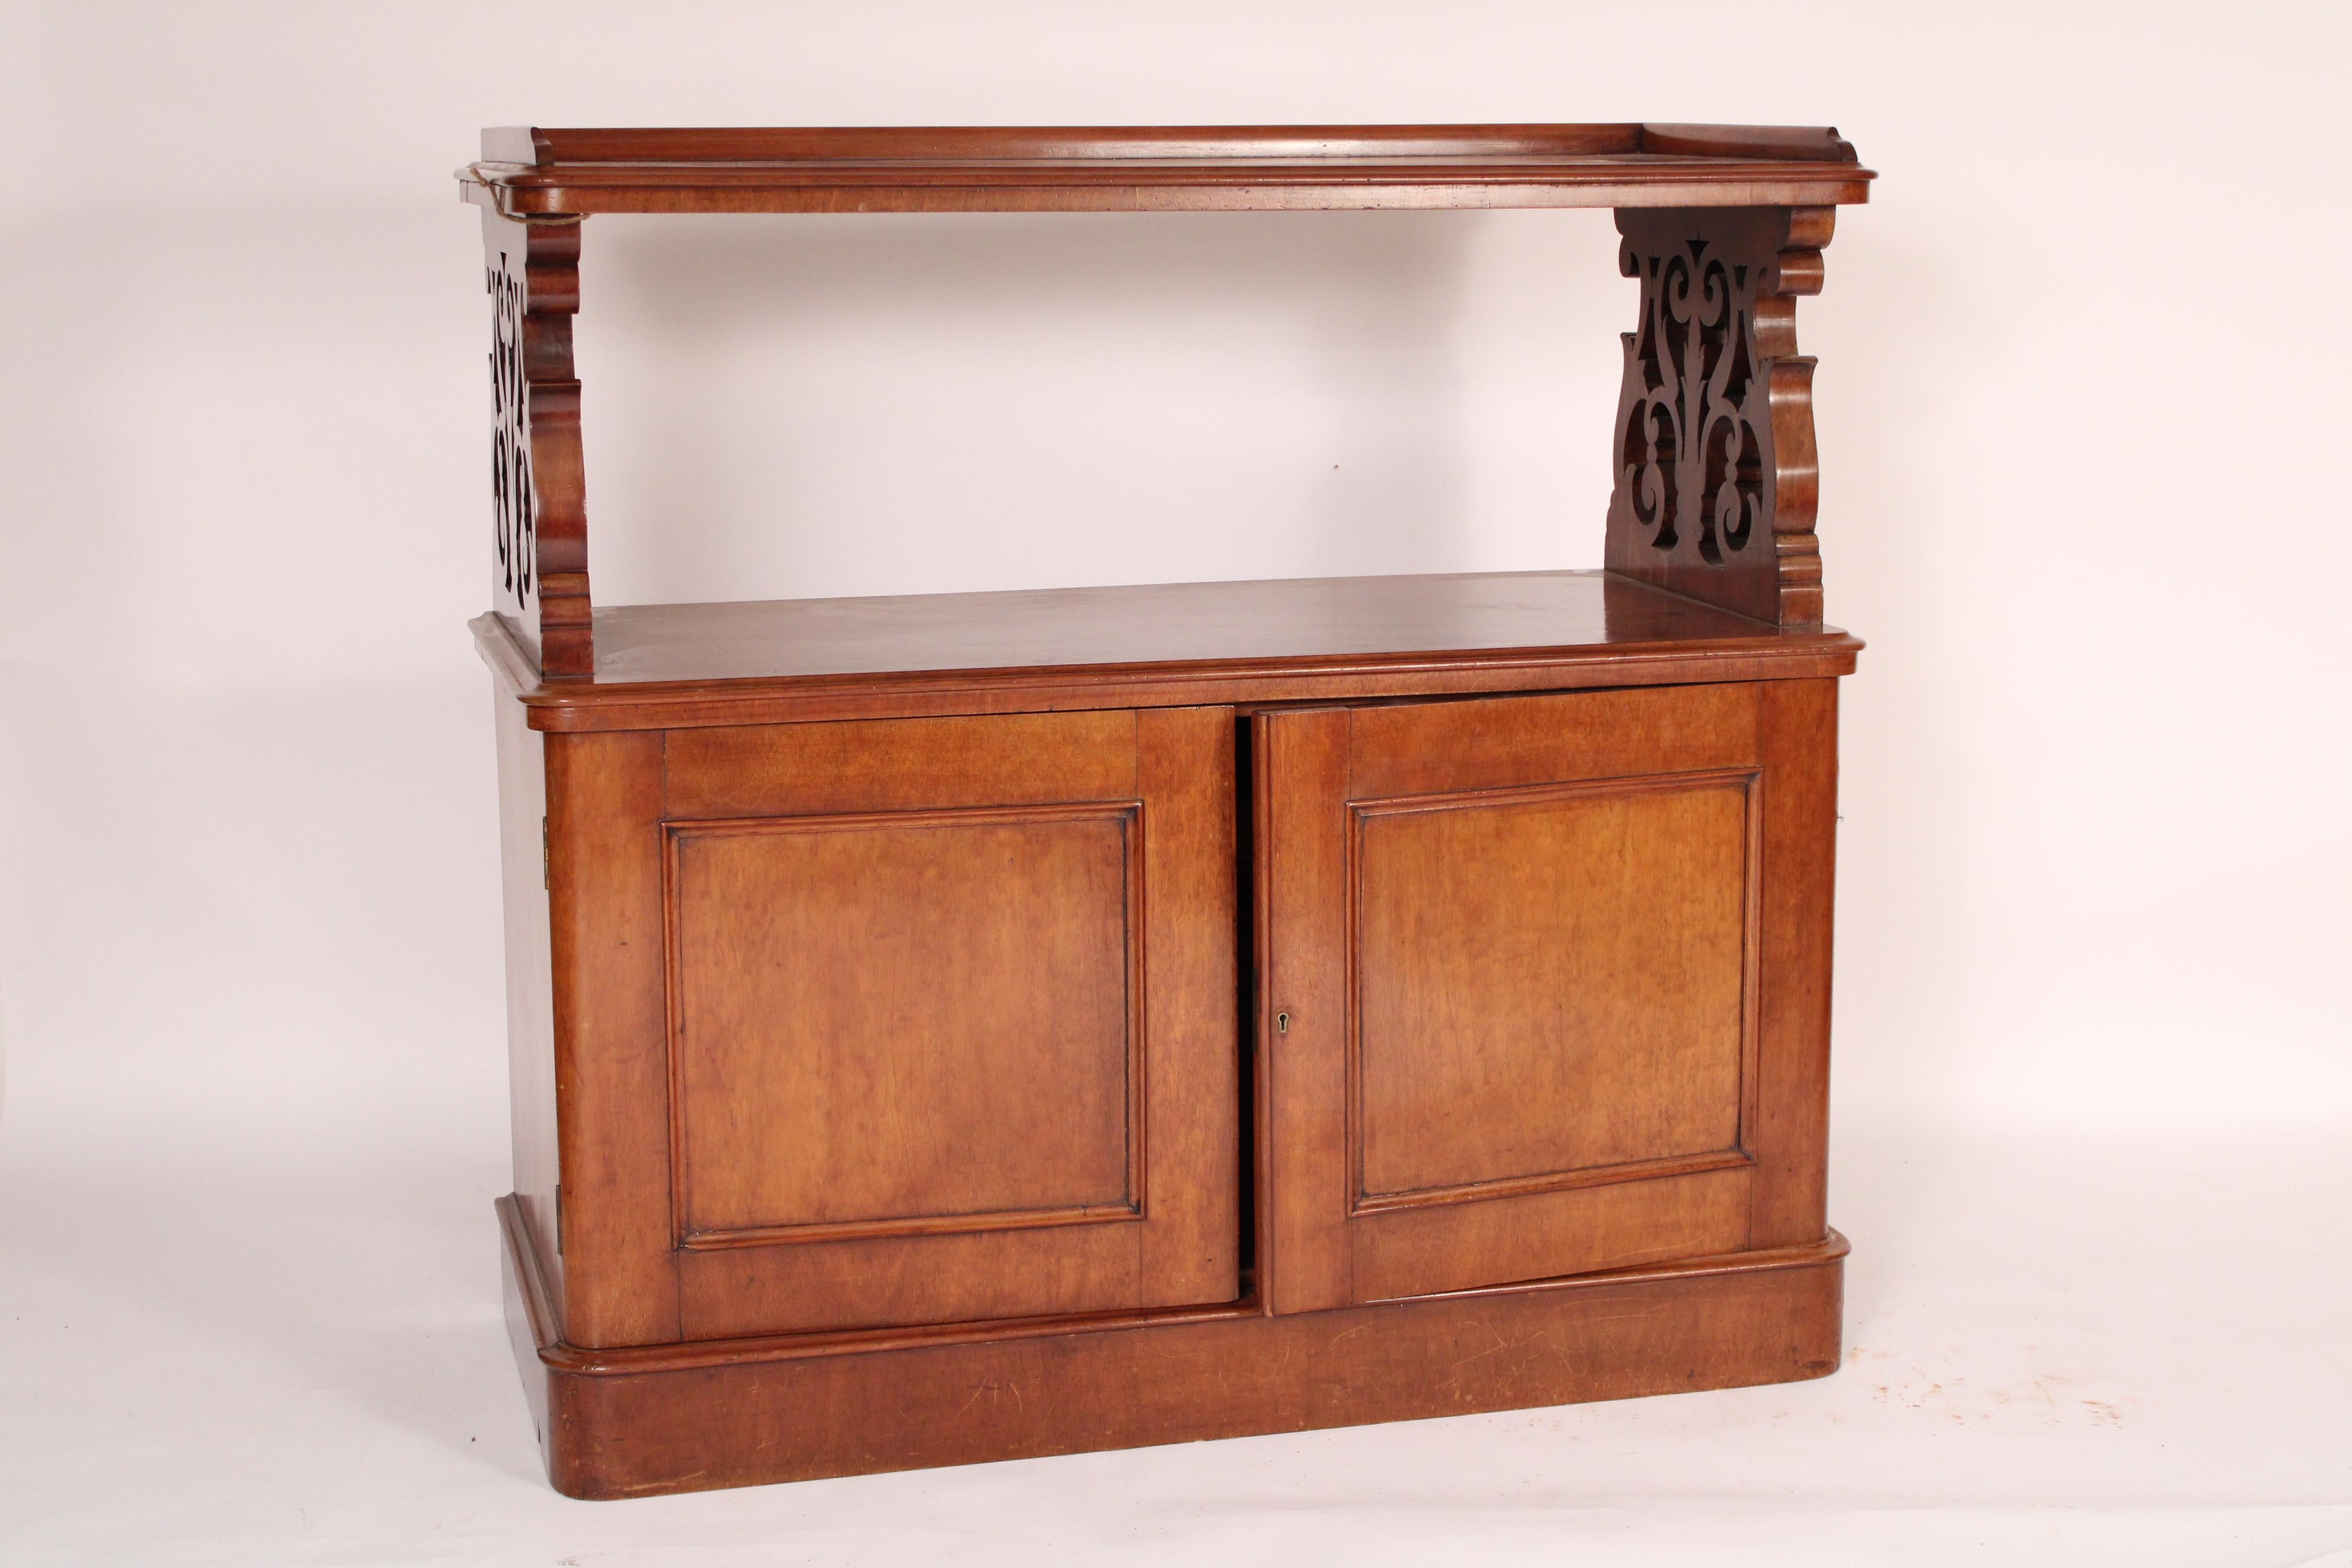 Antique English mahogany etagere / cabinet, late 19th century. With a rectangular top with rounded front corners and a gallery top, a reticulated mahogany support supporting the top, the lower section with two doors, inside of doors are drawers on